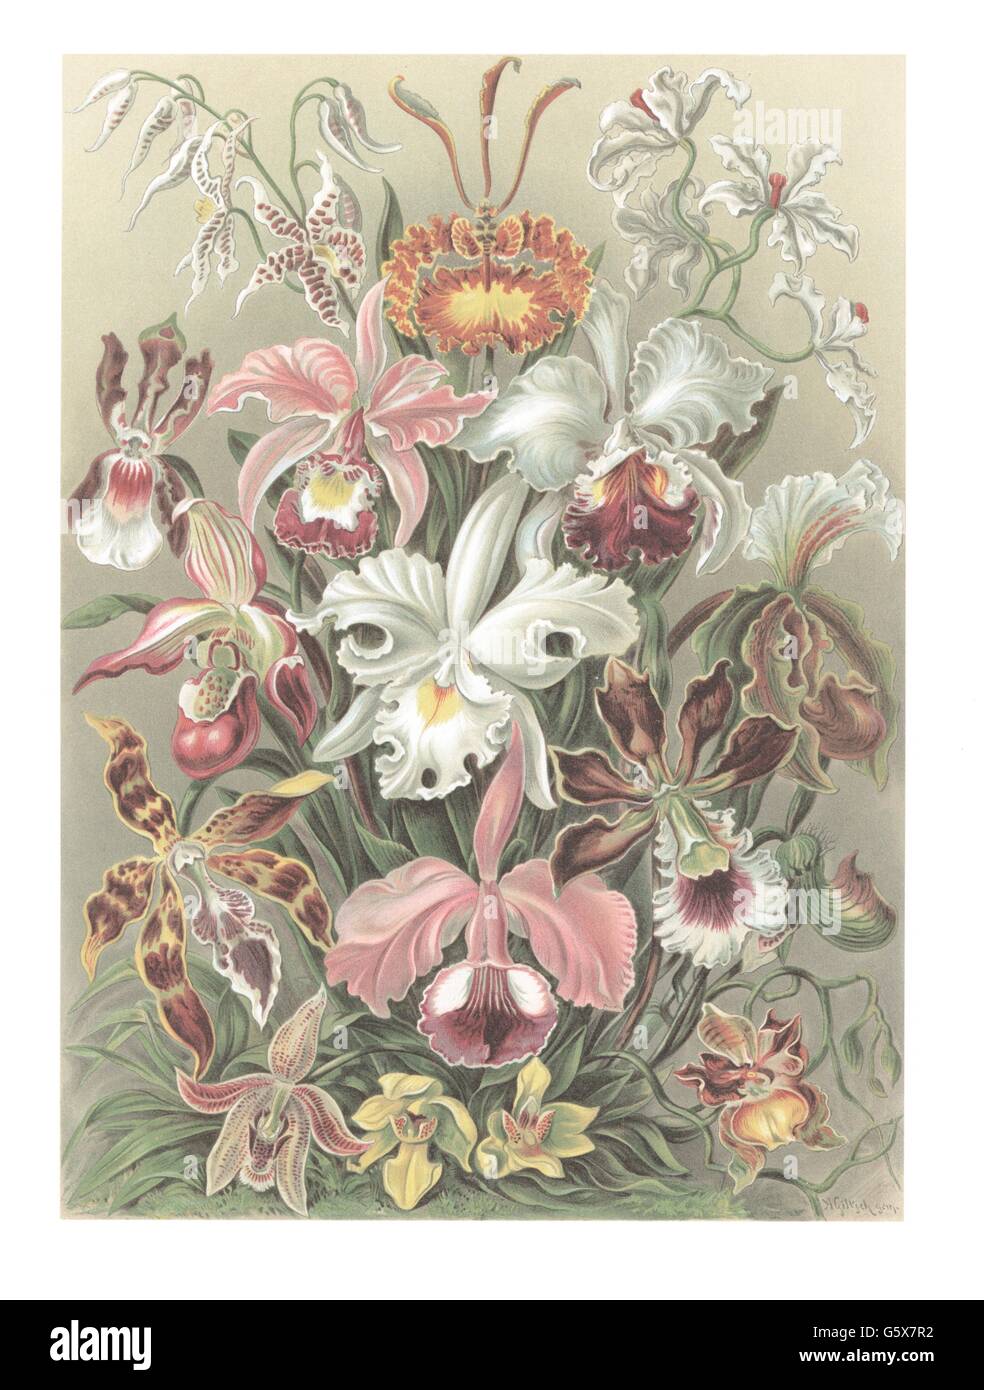 botany, asparagales, orchids (Orchidaceae), colour lithograph, out of: Ernst Haeckel, 'Kunstformen der Natur', Leipzig - Vienna, 1899 - 1904, Additional-Rights-Clearences-Not Available Stock Photo